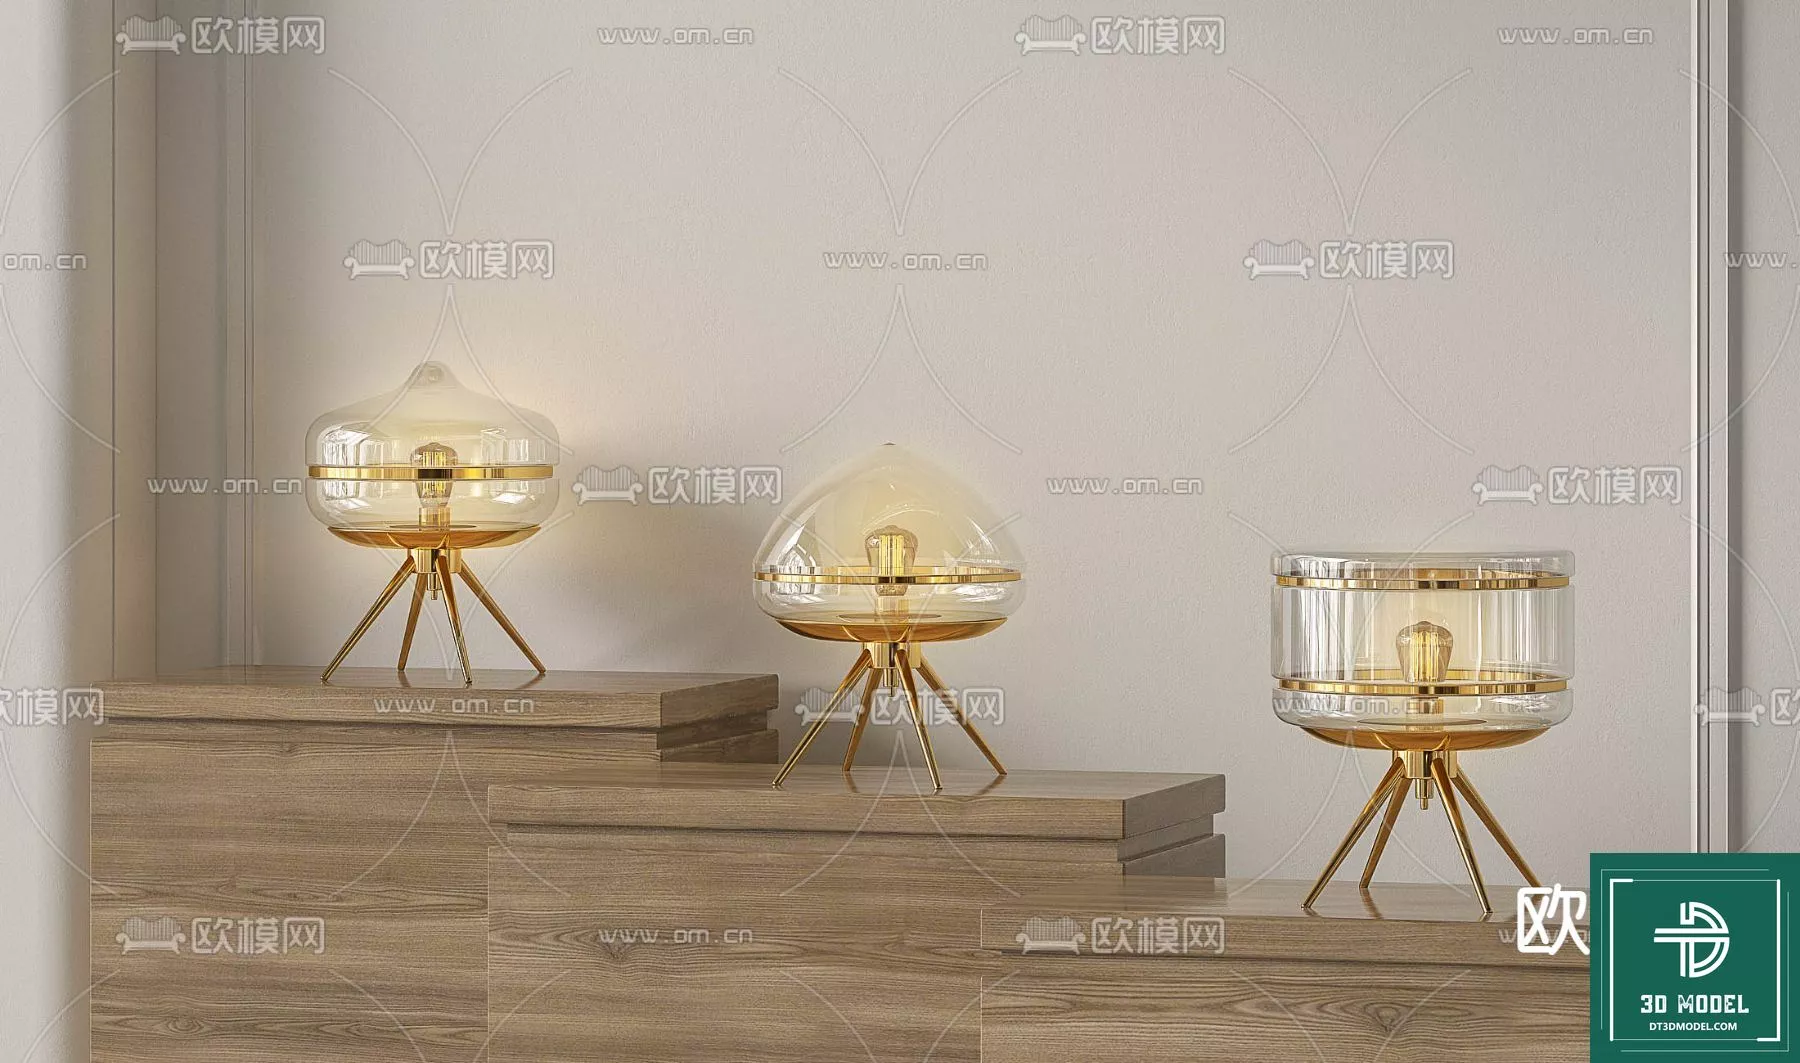 MODERN TABLE LAMP - SKETCHUP 3D MODEL - VRAY OR ENSCAPE - ID14548